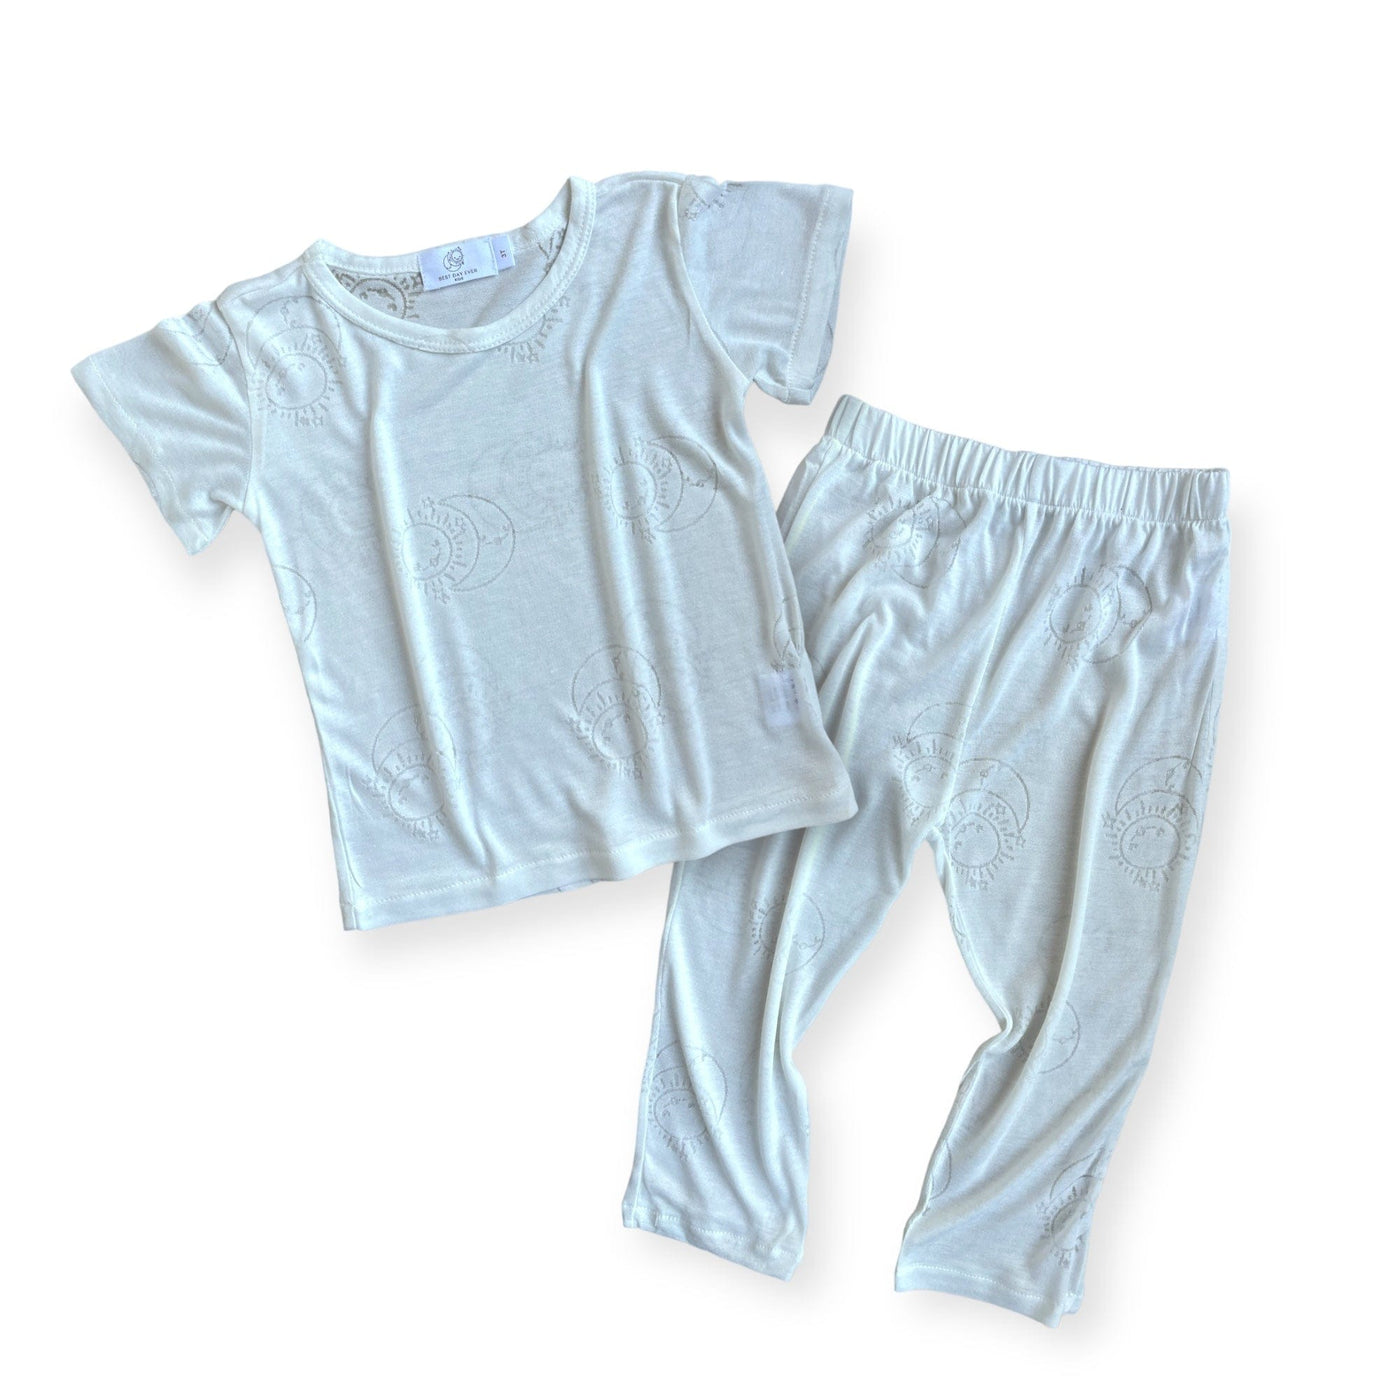 Best Day Ever Kids Baby & Toddler Clothing Anything But Basic Set - White buy online boutique kids clothing